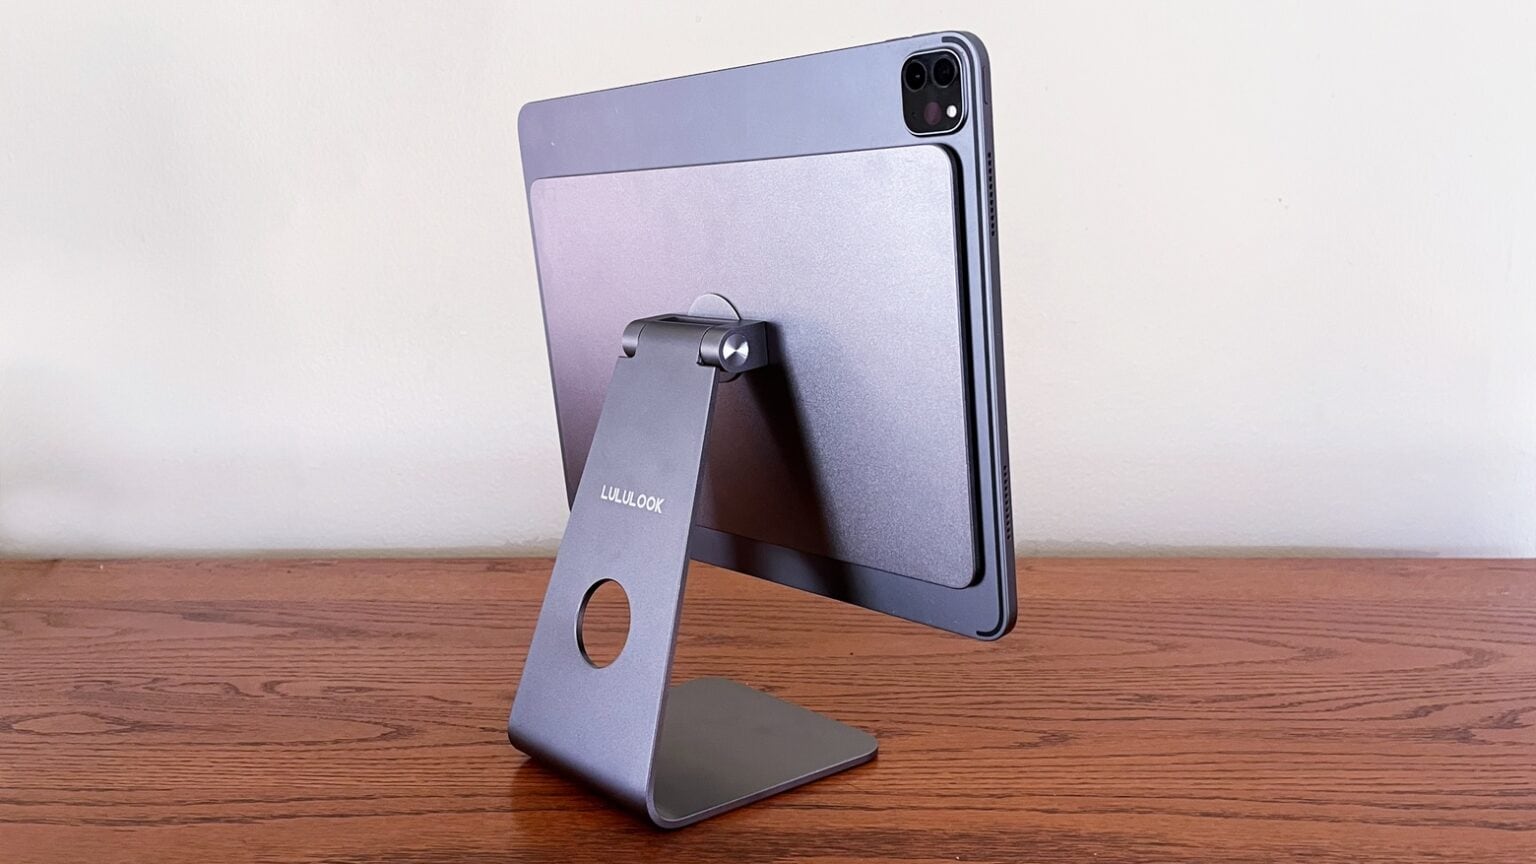 Lululook Urban Magnetic iPad Stand review